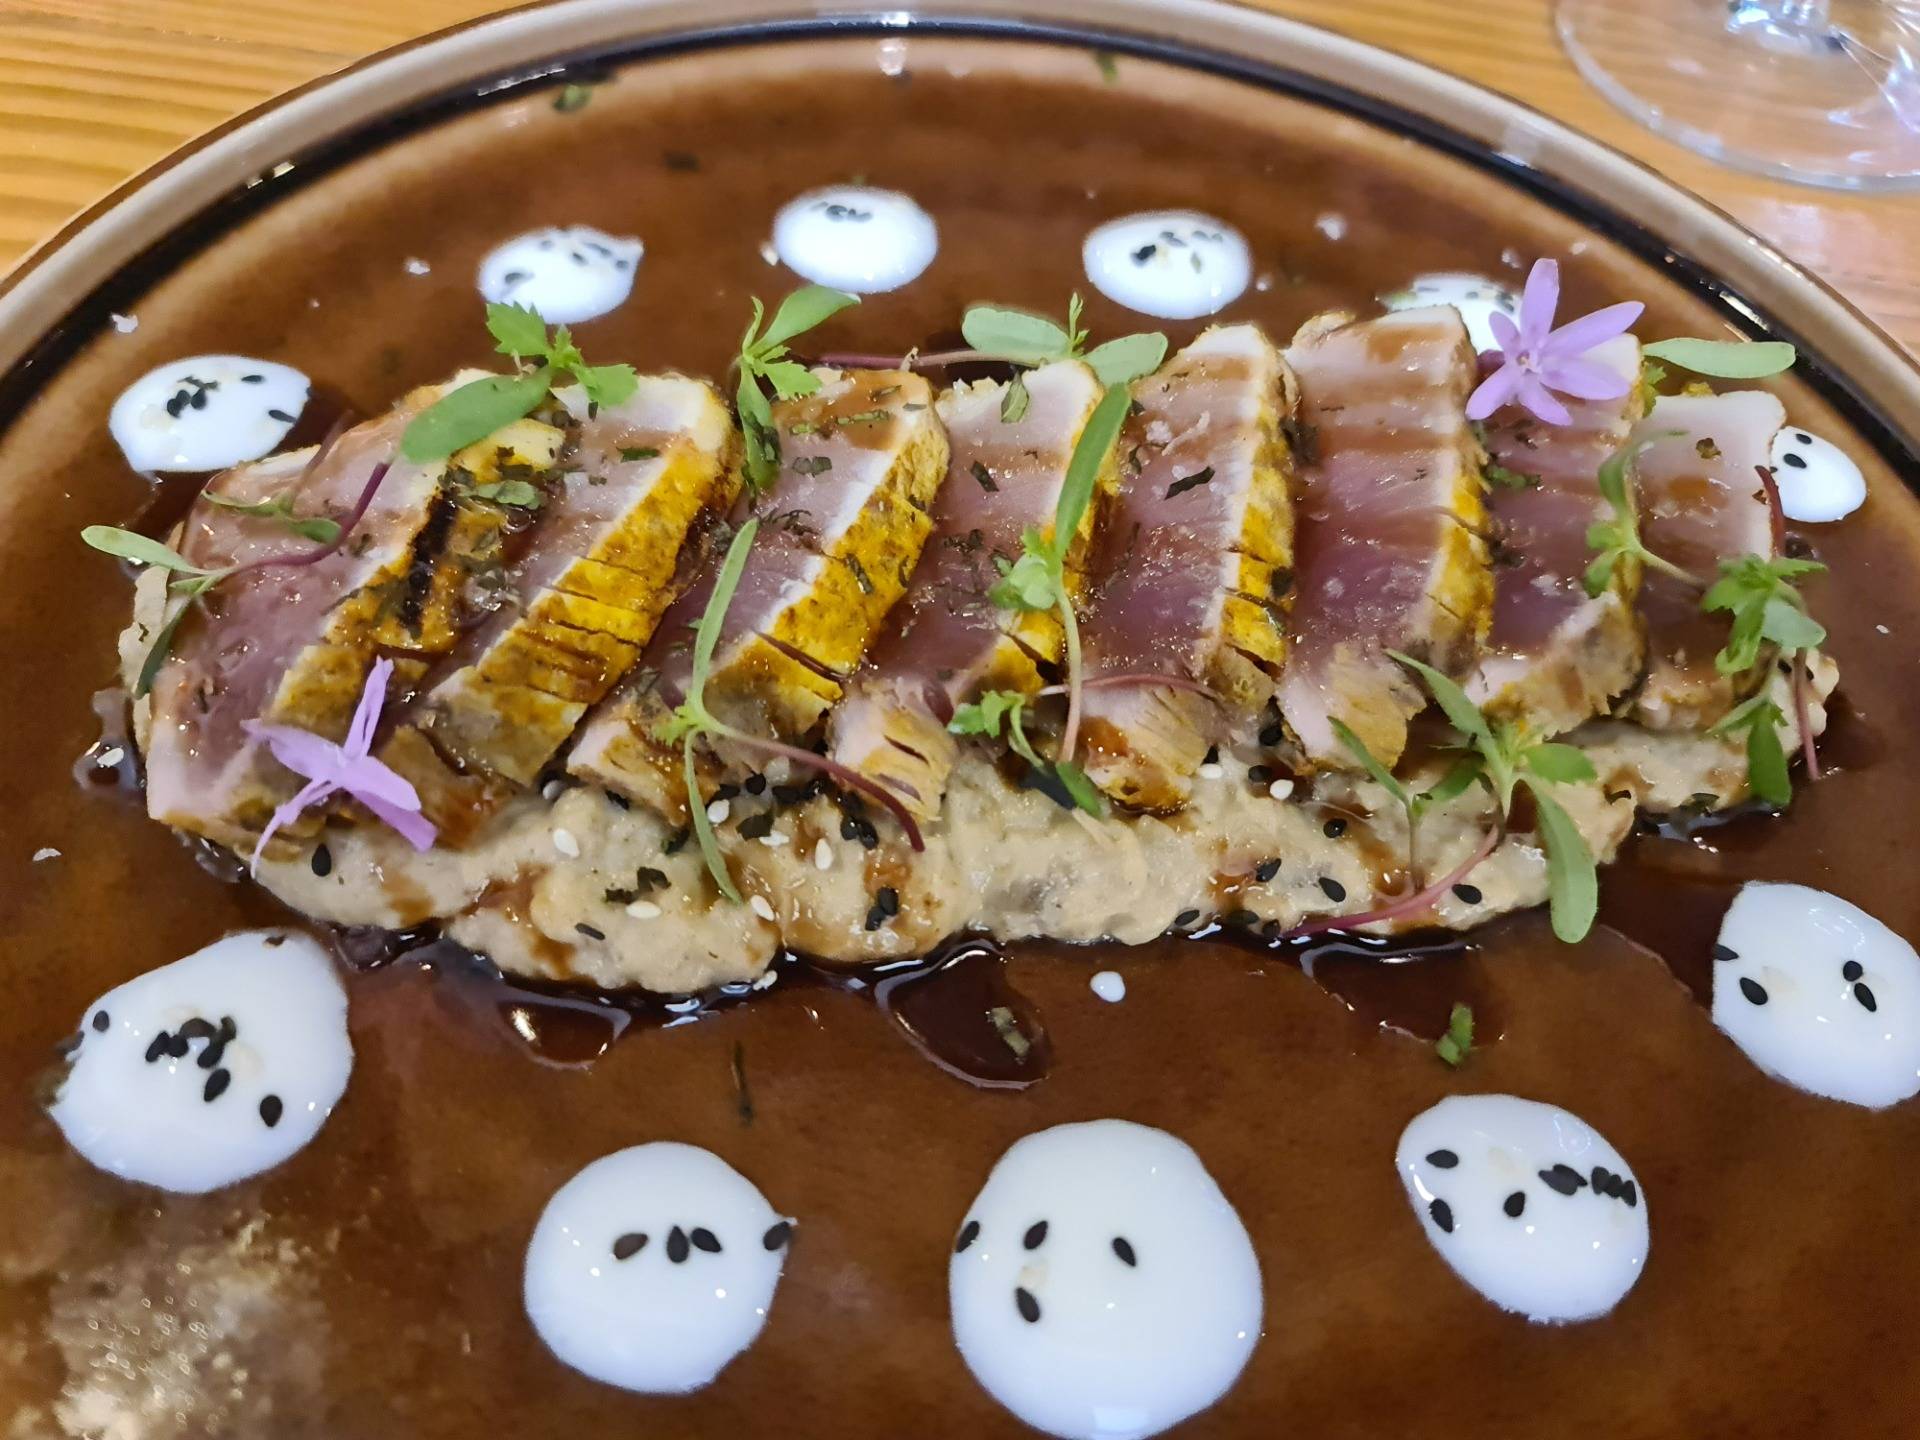 Lebanese style bonito (white tuna) marinated in ras-el-hanout and caraway on a Baba Ghanoush (Arabic eggplant paste) with pomegranate molasses, yogurt dots, tangerine sprouts and pine nuts (€21.50) (3).